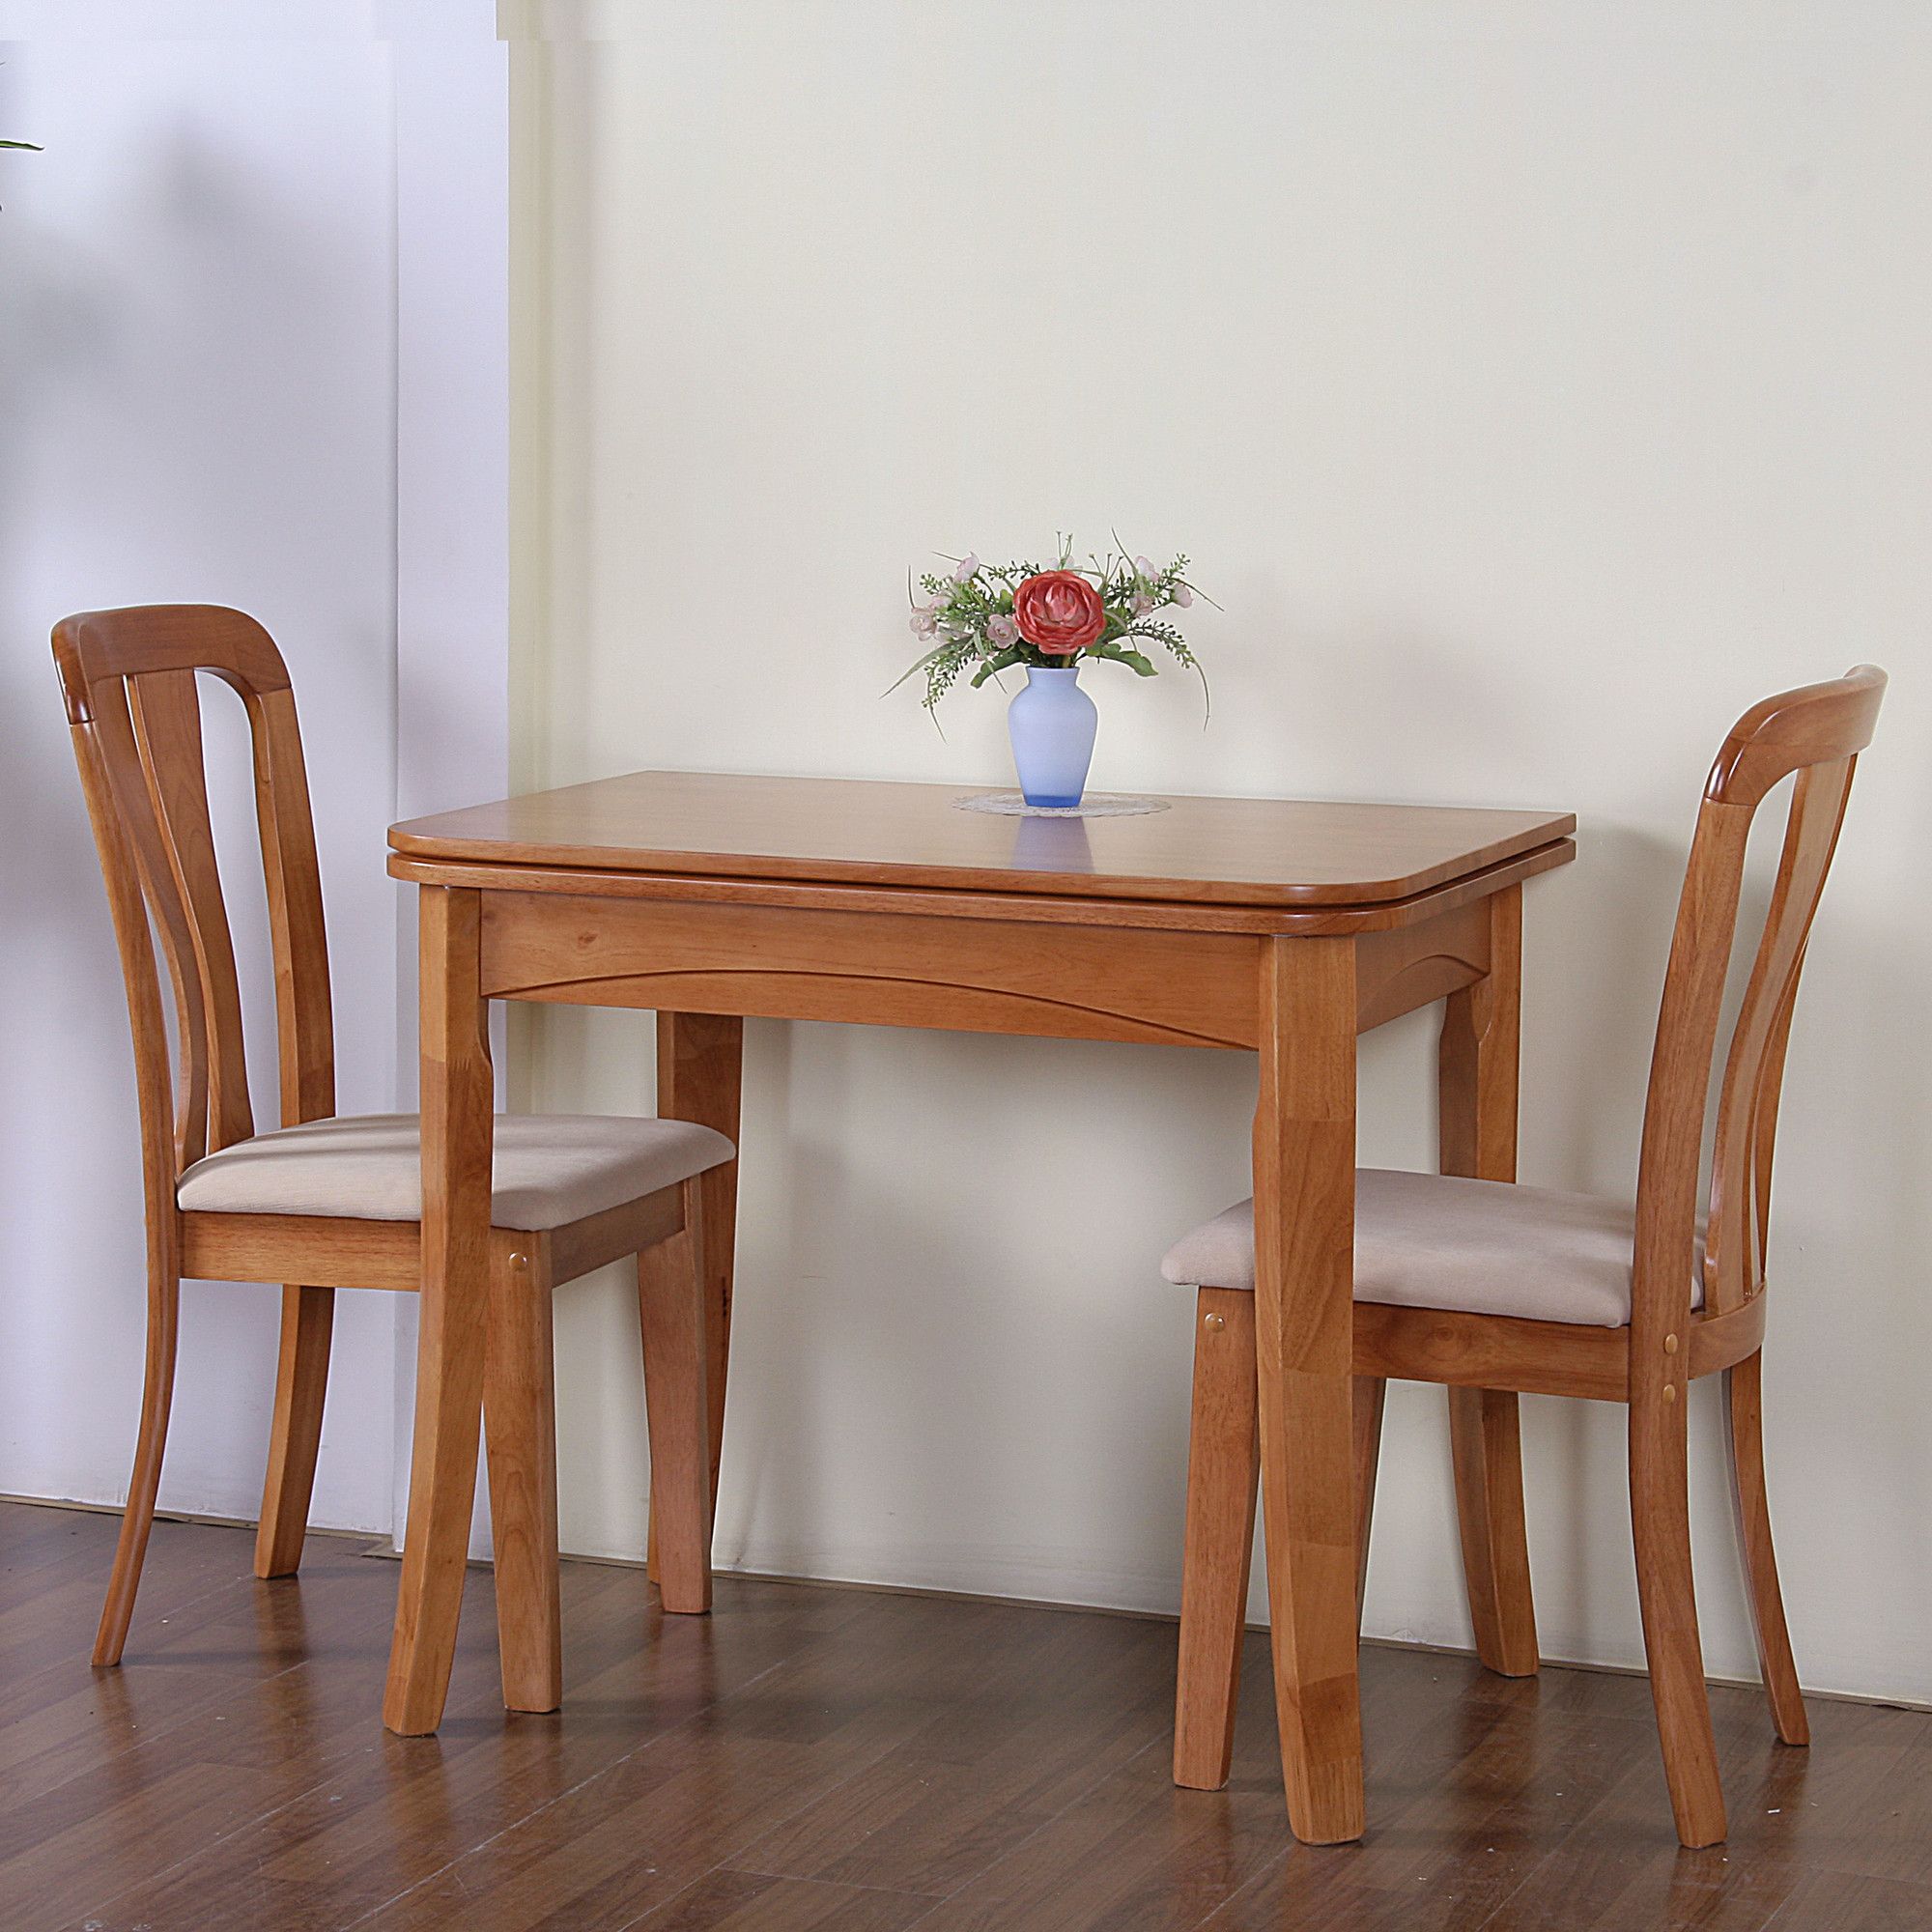 G&P Furniture Windsor House 3-Piece Newark Flip Top Dining Set with Slatted Back Chair - Maple at Tesco Direct